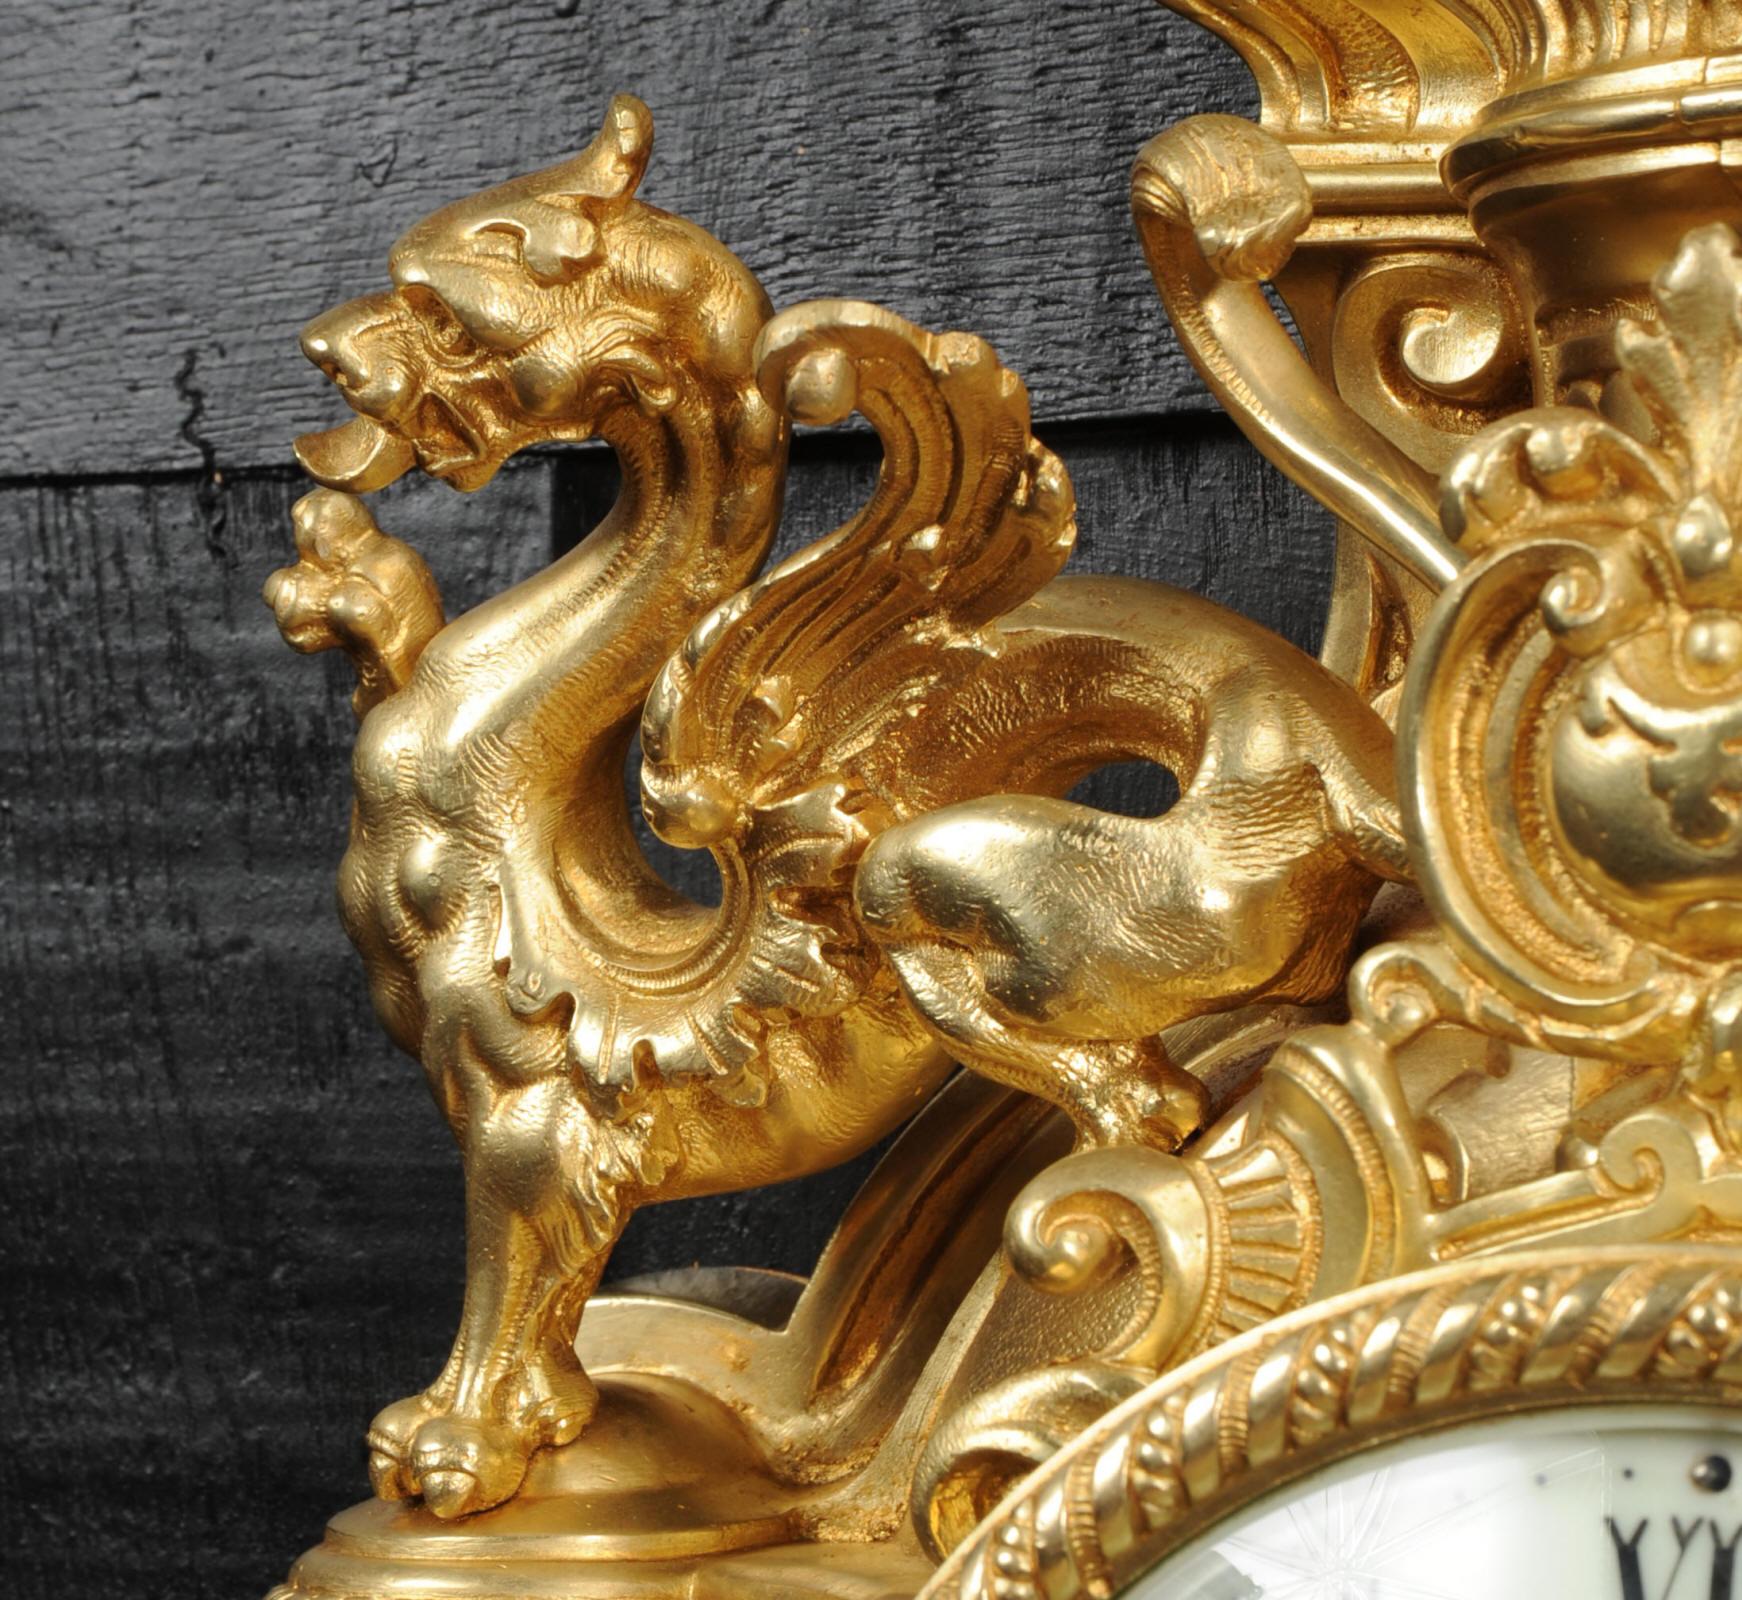 Huge Antique French Gilt Bronze Cartel Wall Clock with Dragons 3